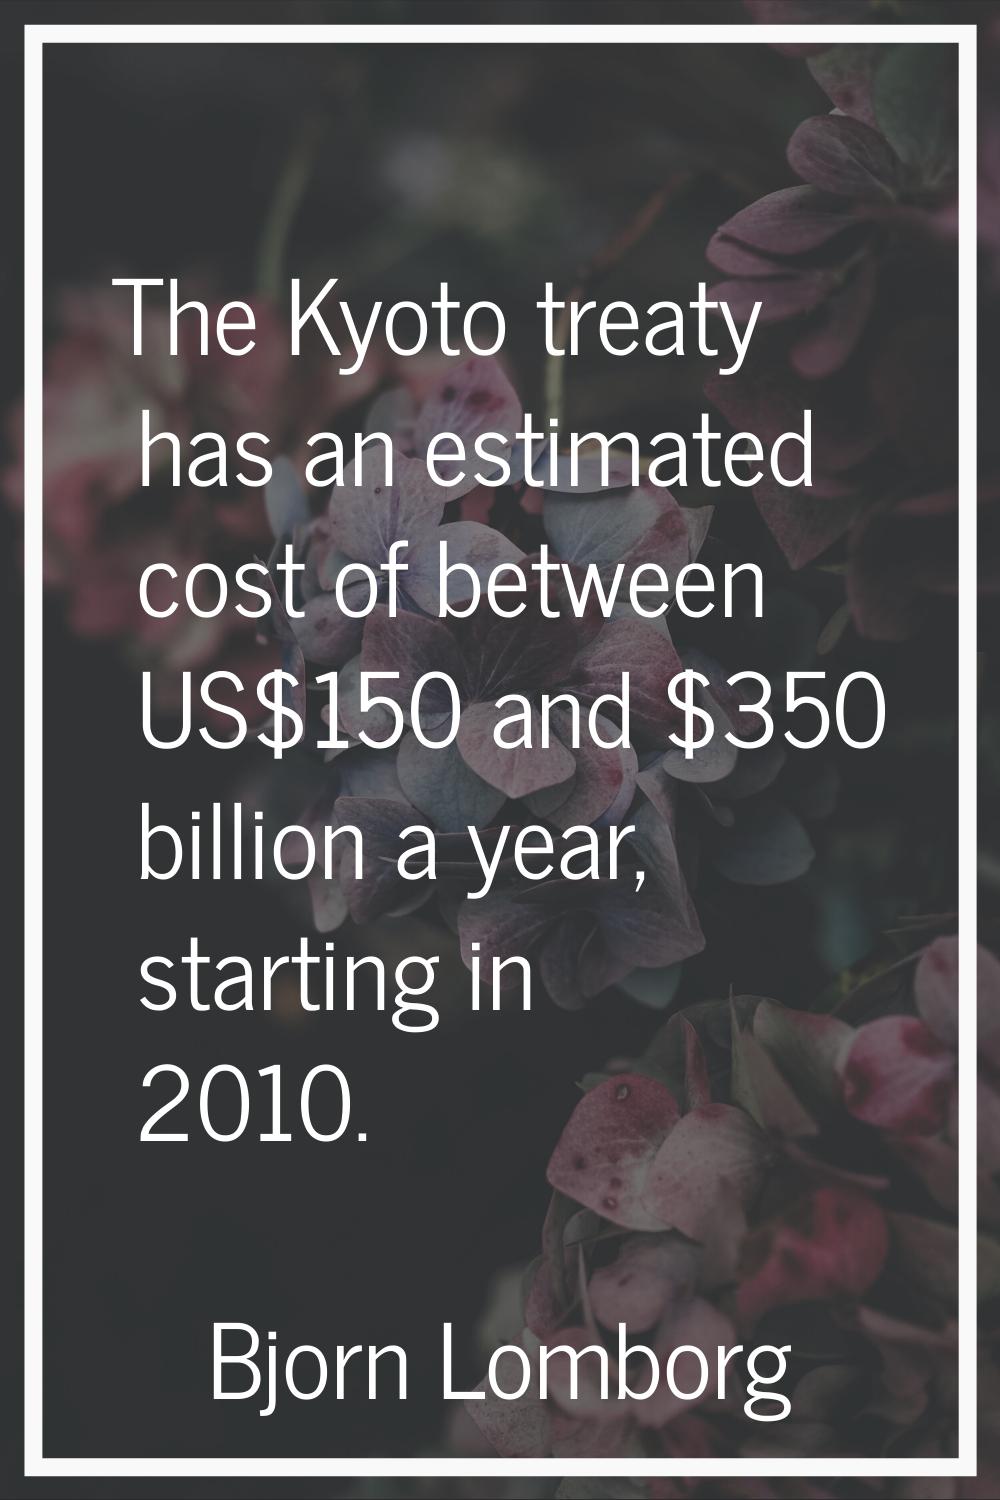 The Kyoto treaty has an estimated cost of between US$150 and $350 billion a year, starting in 2010.